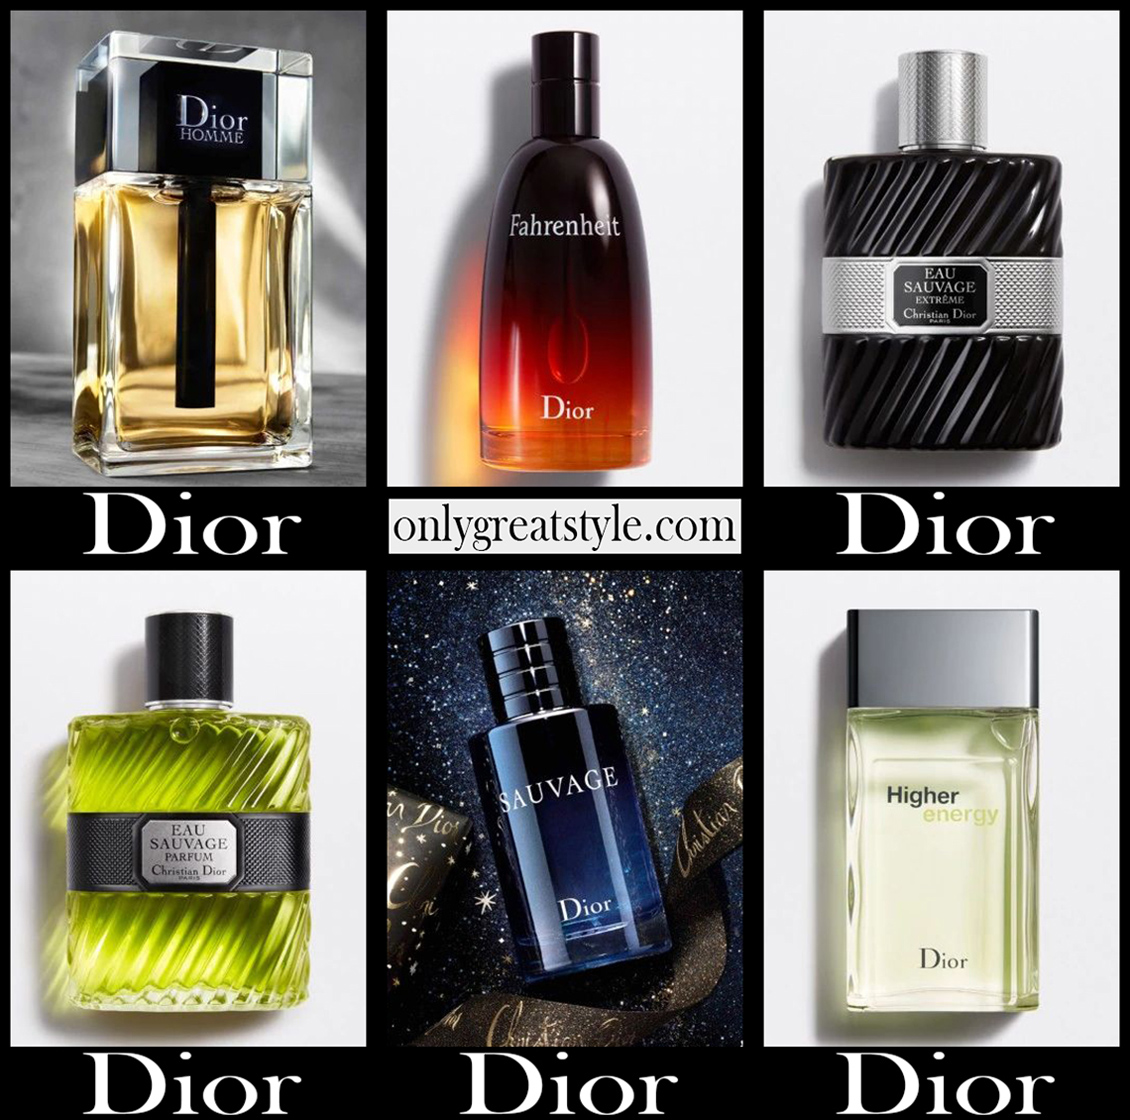 Dior perfumes 2021 new arrivals gift ideas for men